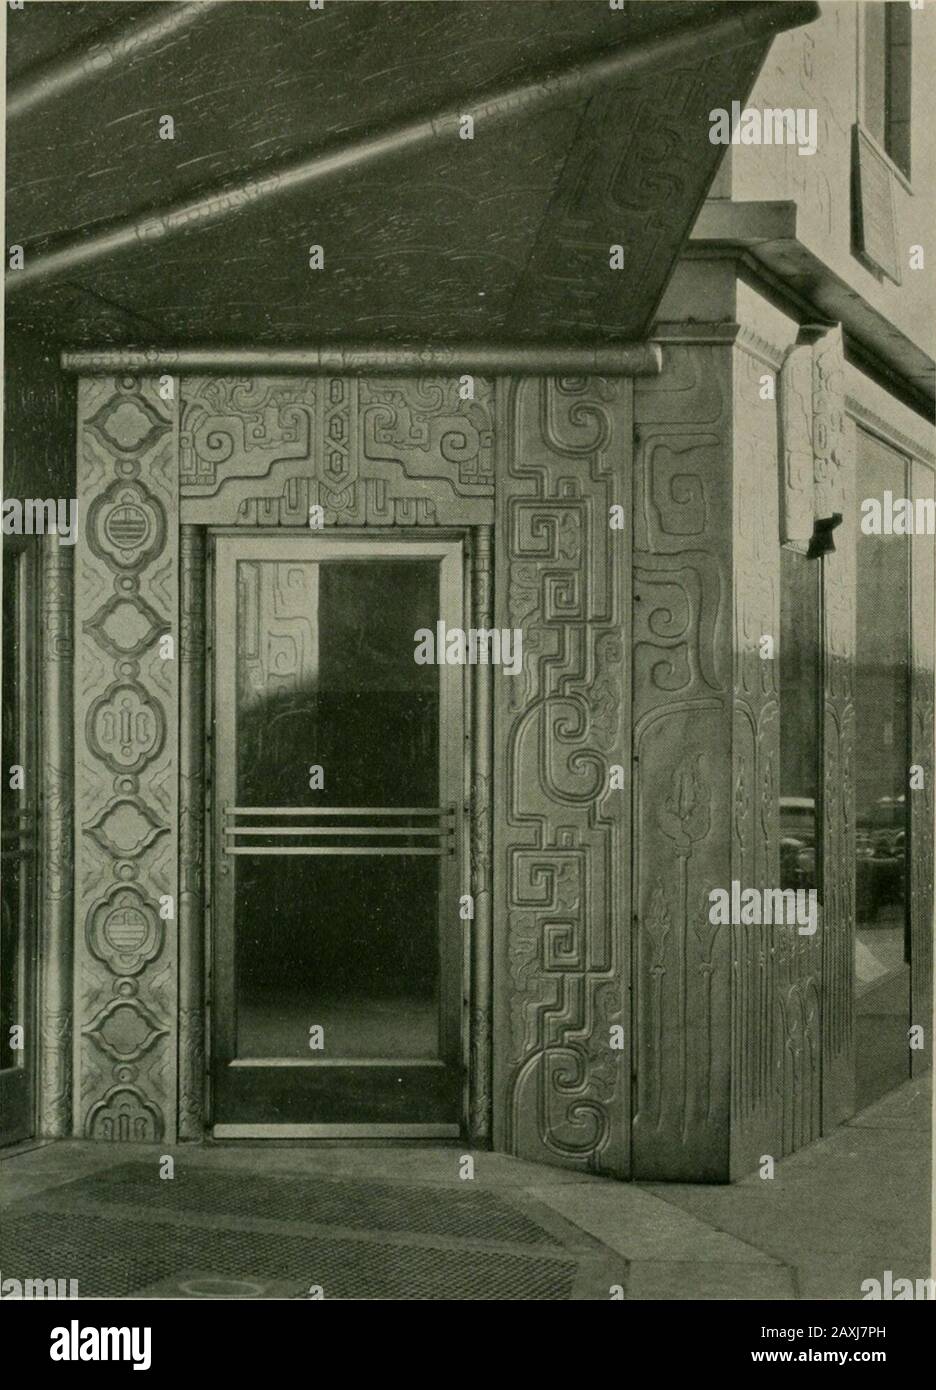 Architect and engineer . DETAIL FROM ELEVATOR DOORS, FOUR FIFTY SUTTER, SAN FRANCISCOJ. R. Miller and T. L. Pflueger, Architects irreducible cross section and the interven- planted flat on the piers and little over oneing windows pushed out to the limit with- inch in thickness, including the mortar bed-out any returns, the piers themselves are ding and necessary wire ties,covered with thin flat rectangular terra In considering the exterior, it will becotta tiles scored at the back for cohesion, seen that this careful space saving plays the 48 AR.CHITECT AND ENGINFXR. April. 14,^(1. SIDE ENTRAN Stock Photo